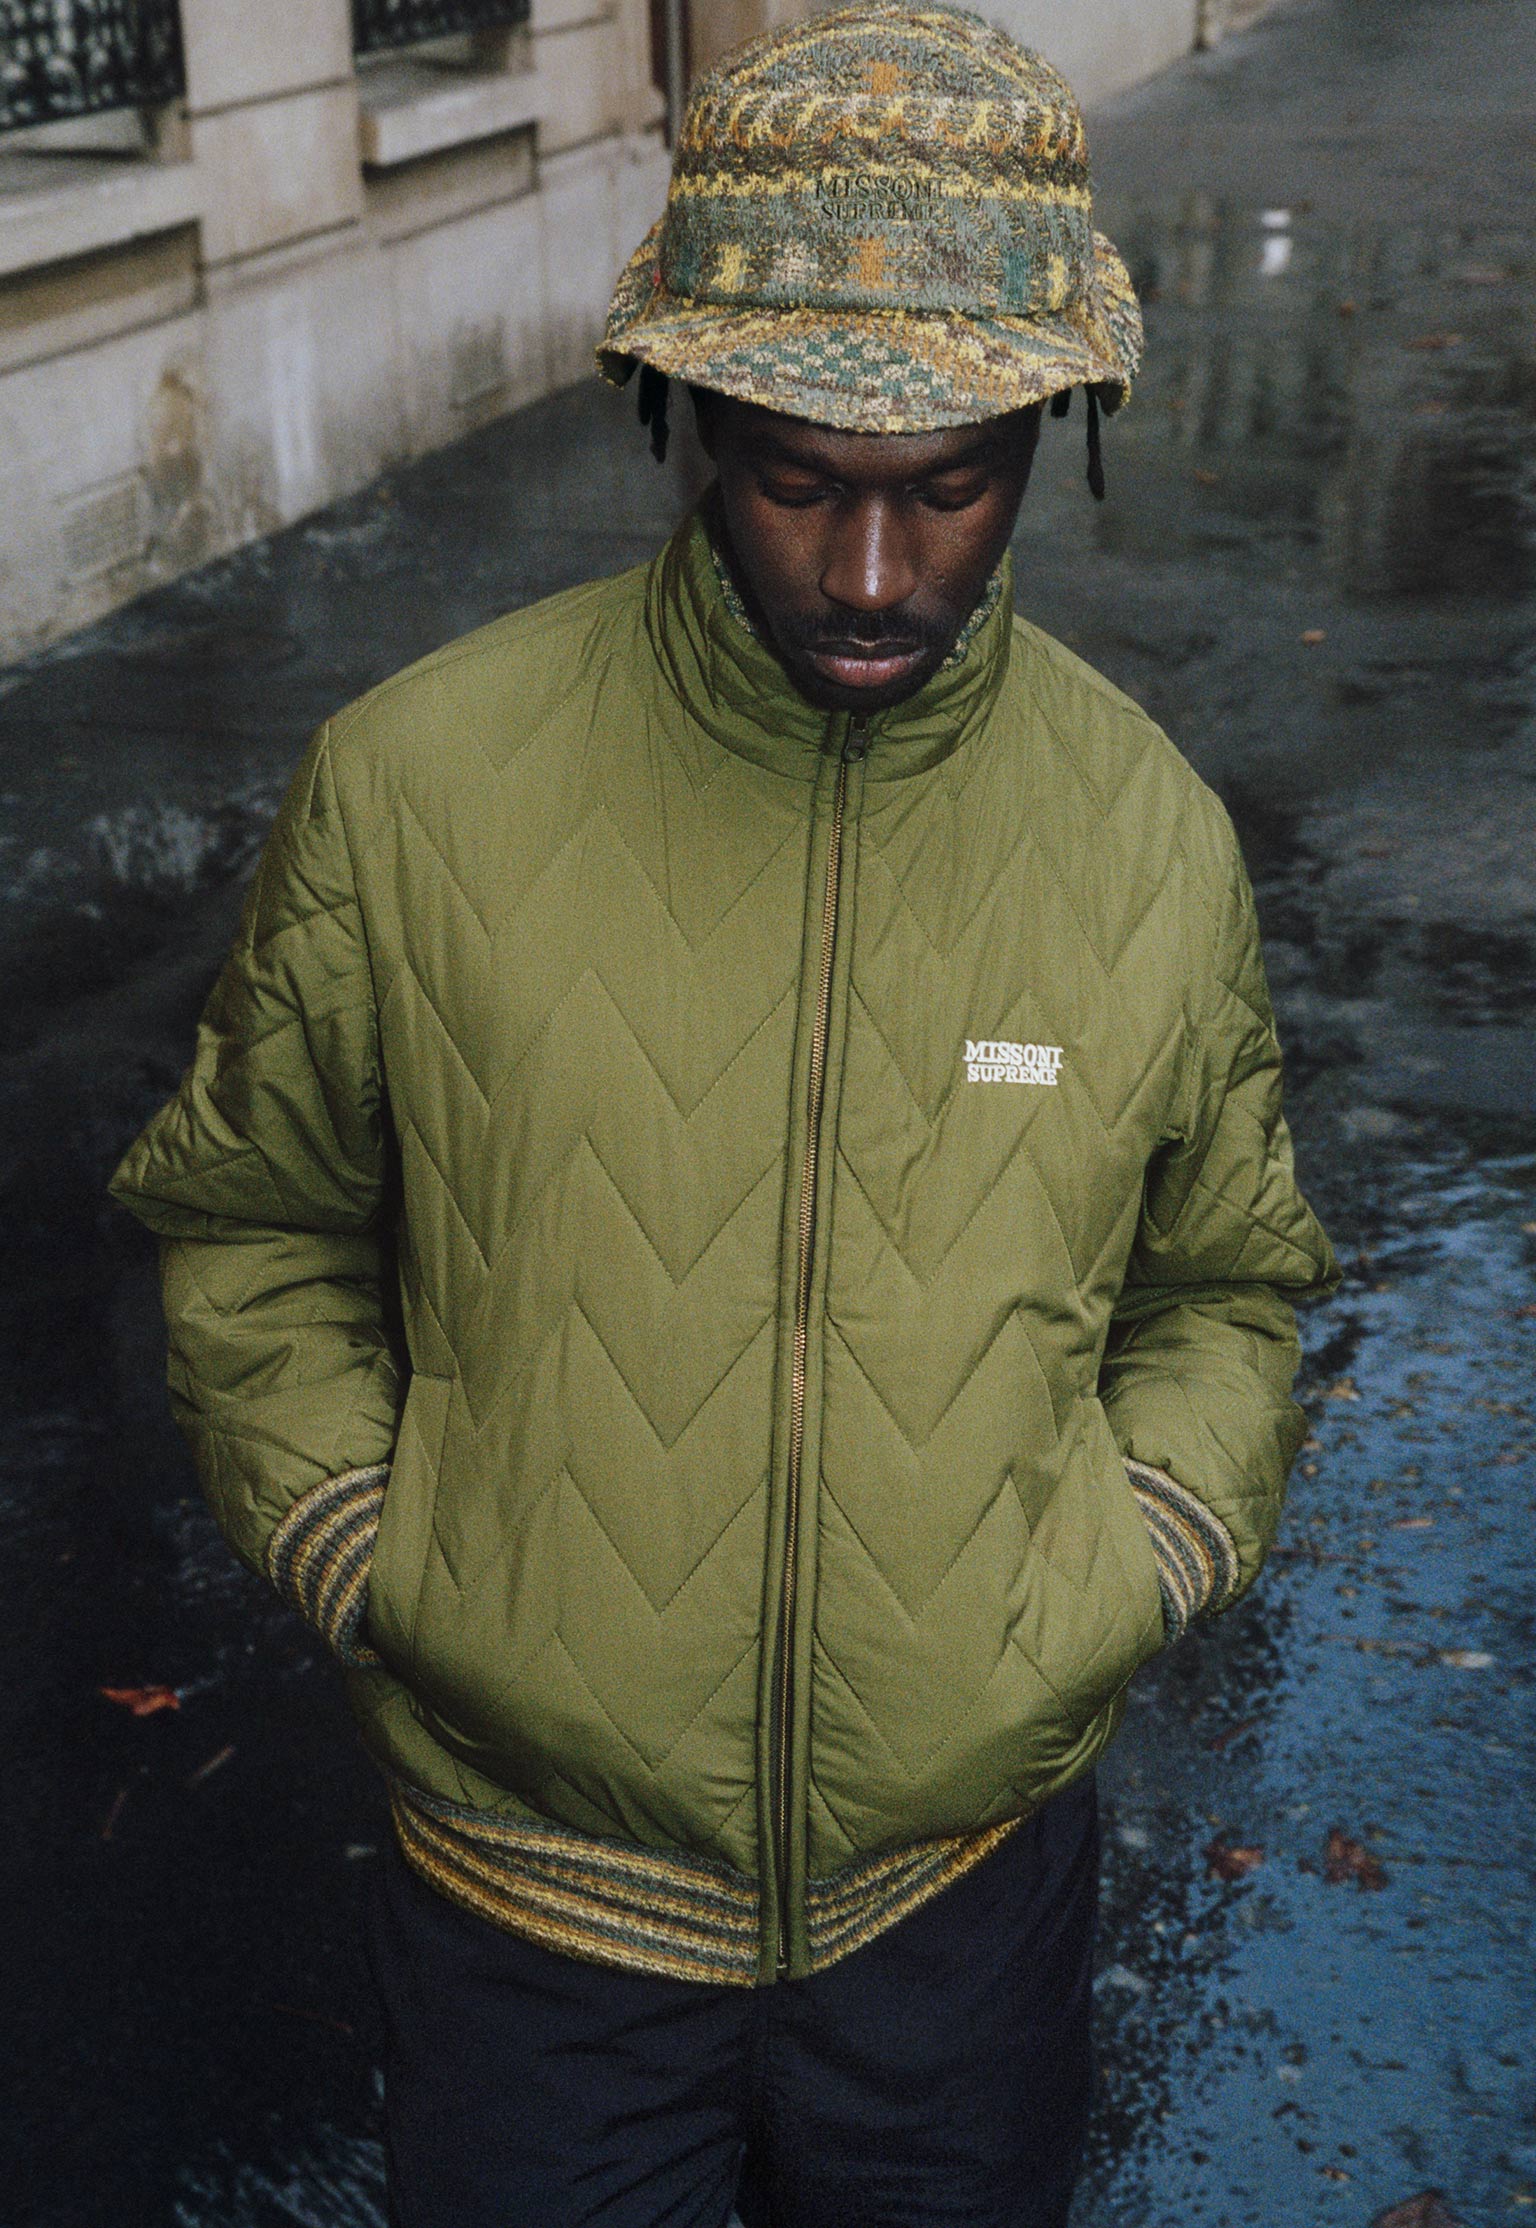 The model is wearing a waterproof jacket that matches the bucket hat